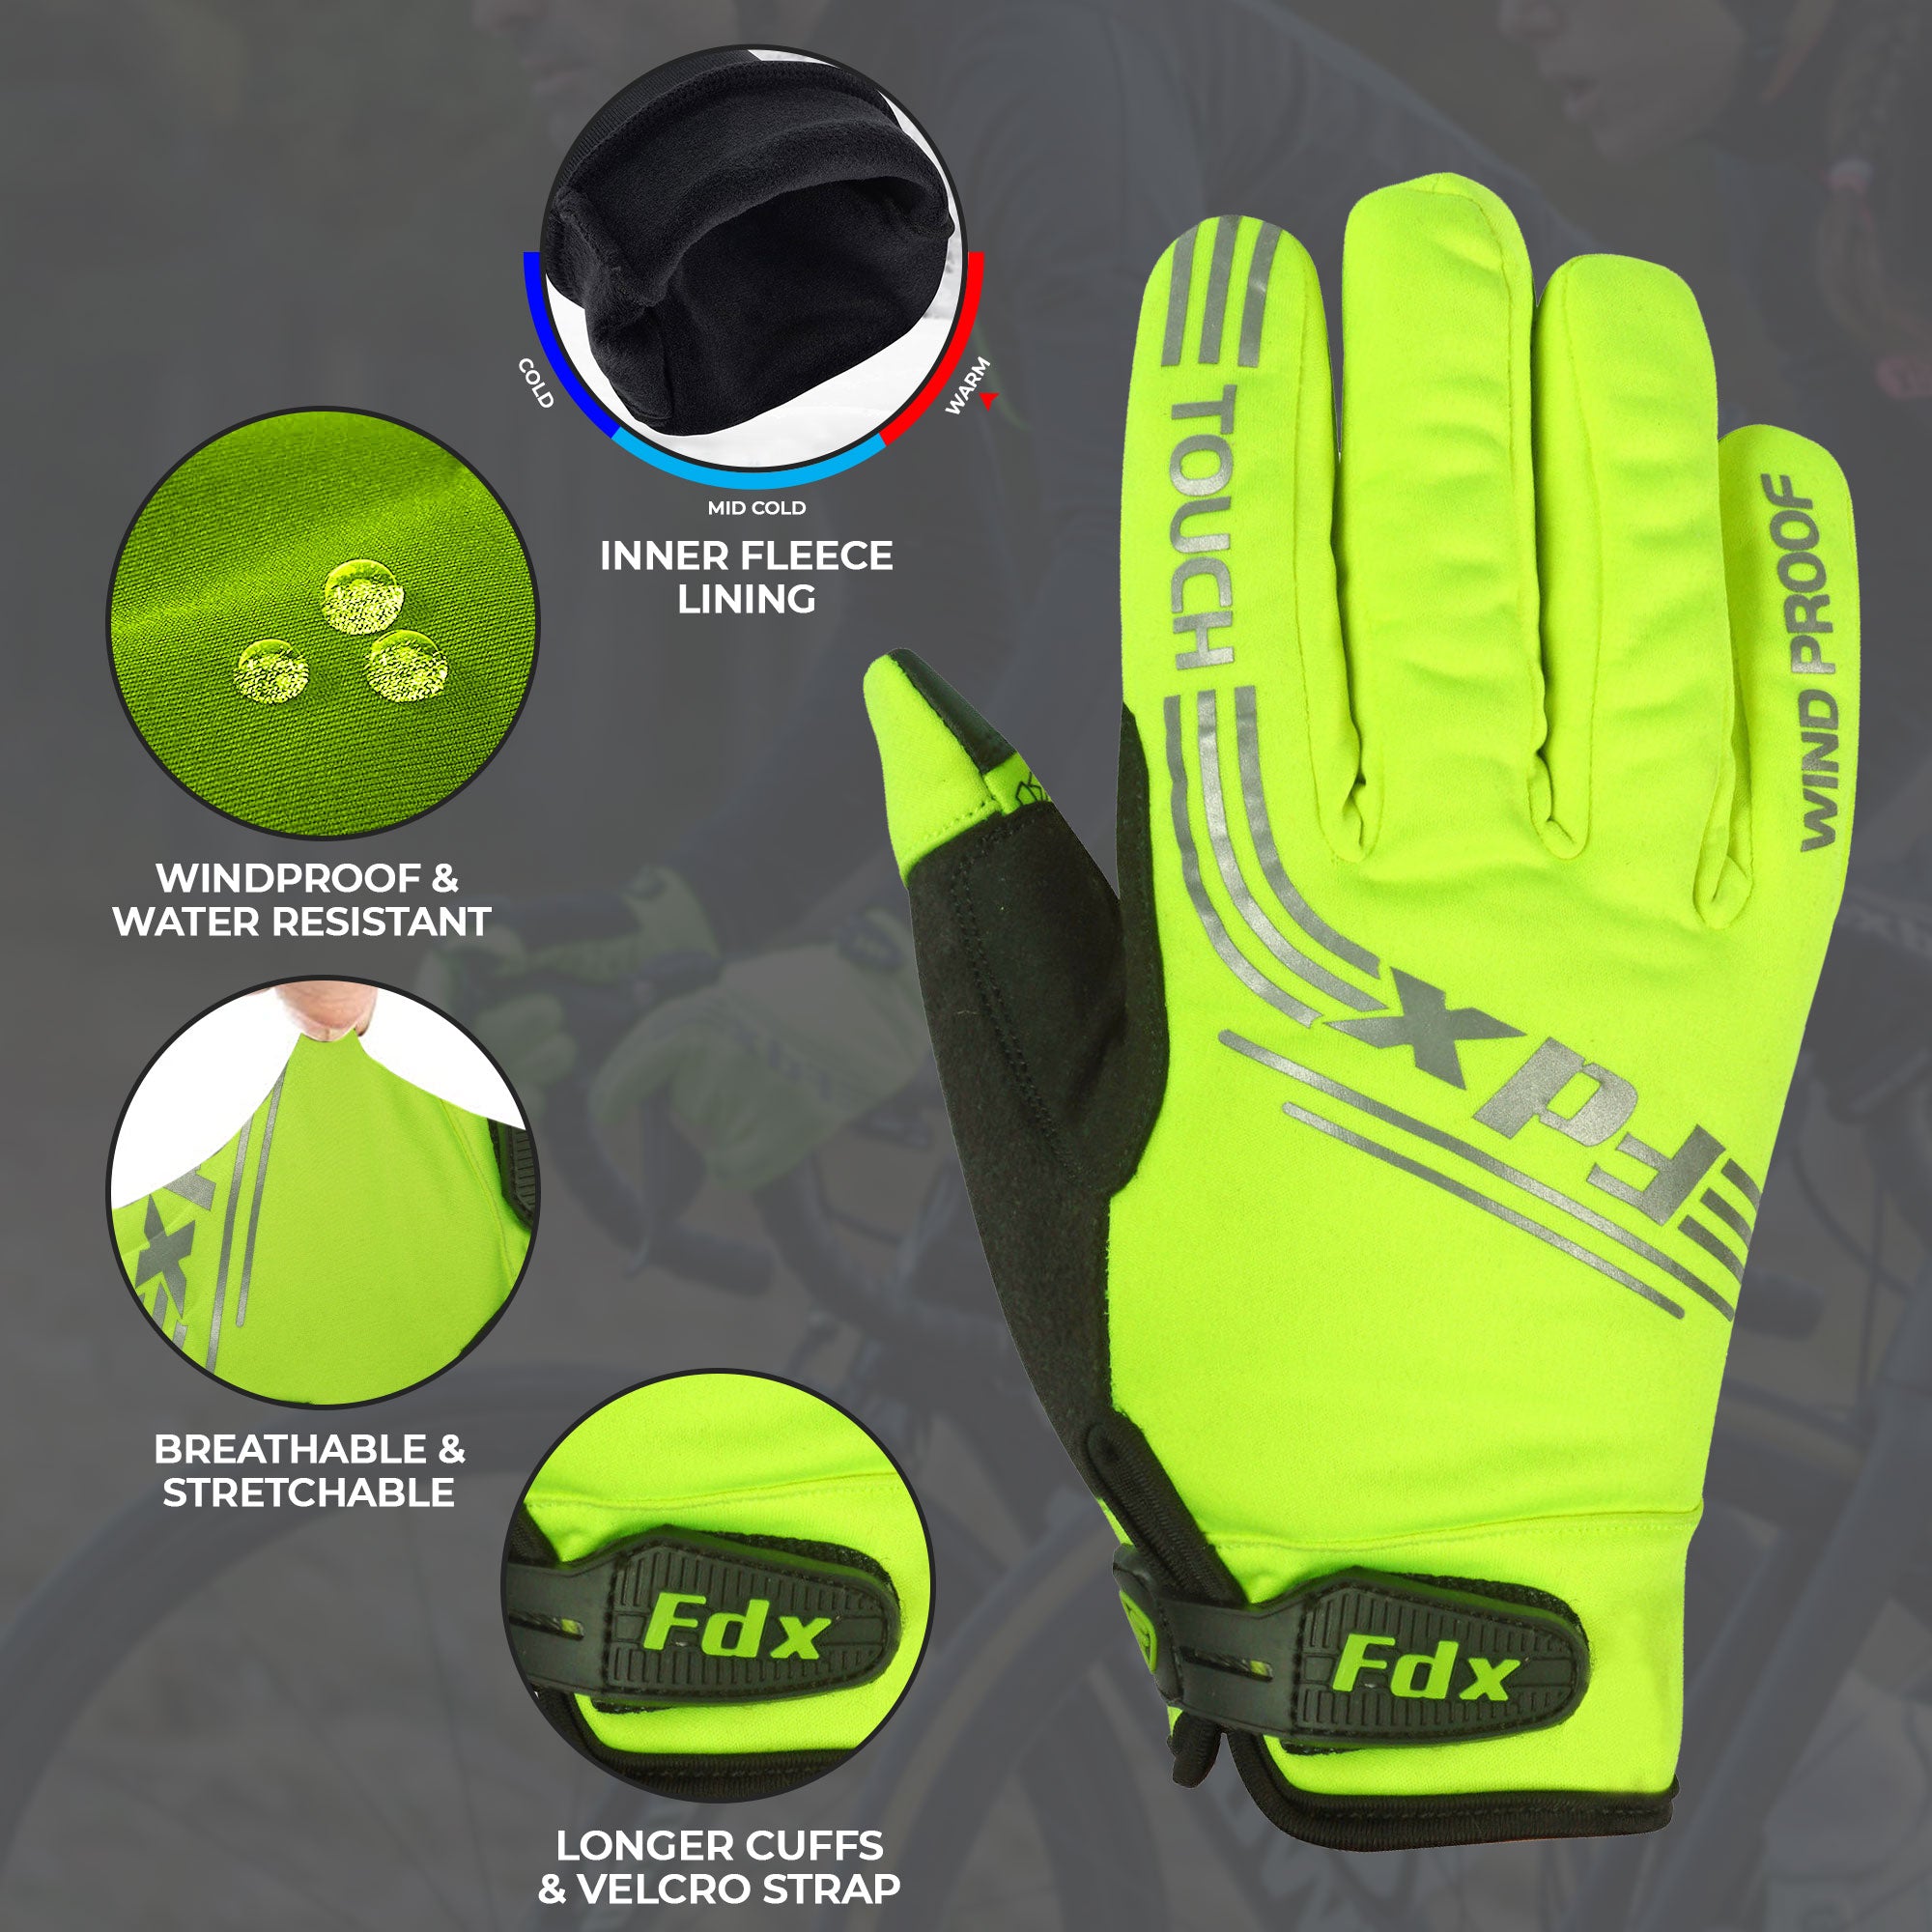 Fdx Yellow Full Finger Cycling Gloves for Winter MTB Road Bike Reflective Thermal & Touch Screen - Subzero